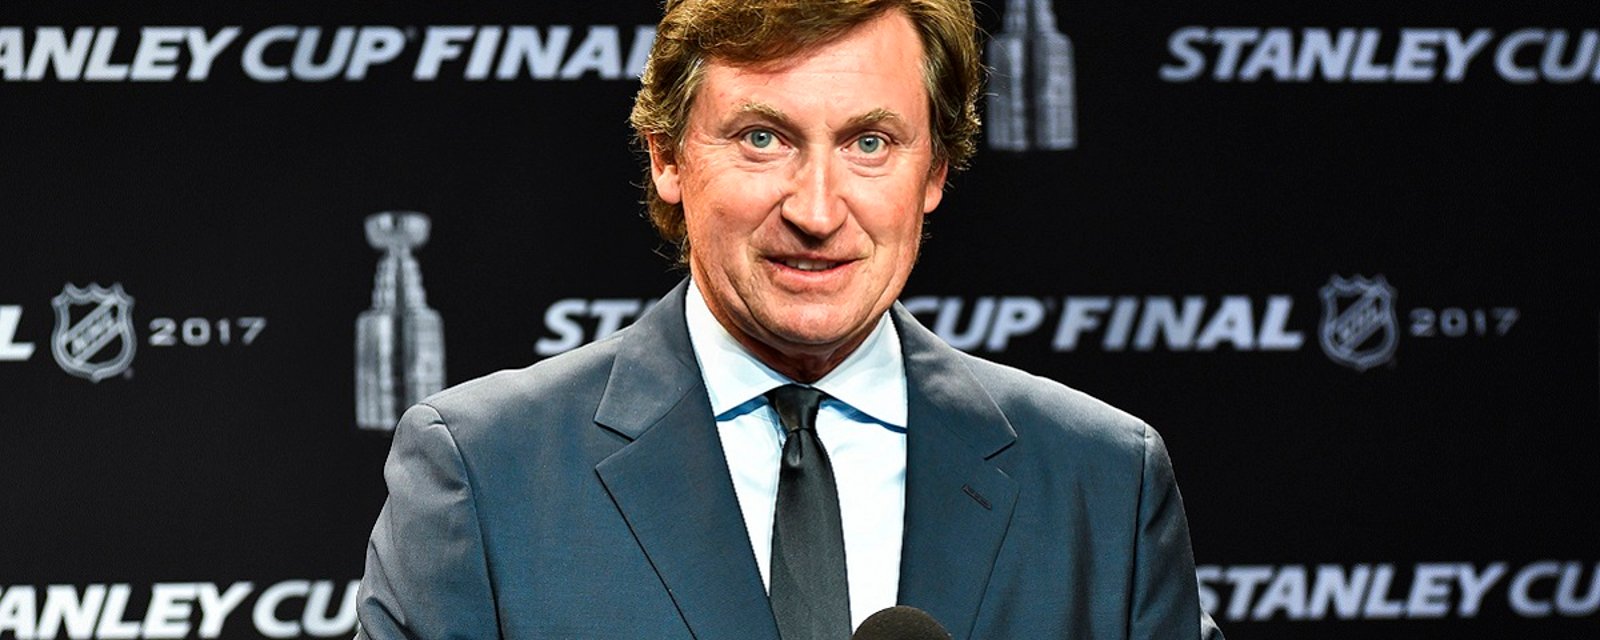 Oilers make 2 roster changes amidst major pressure from Katz and Gretzky.